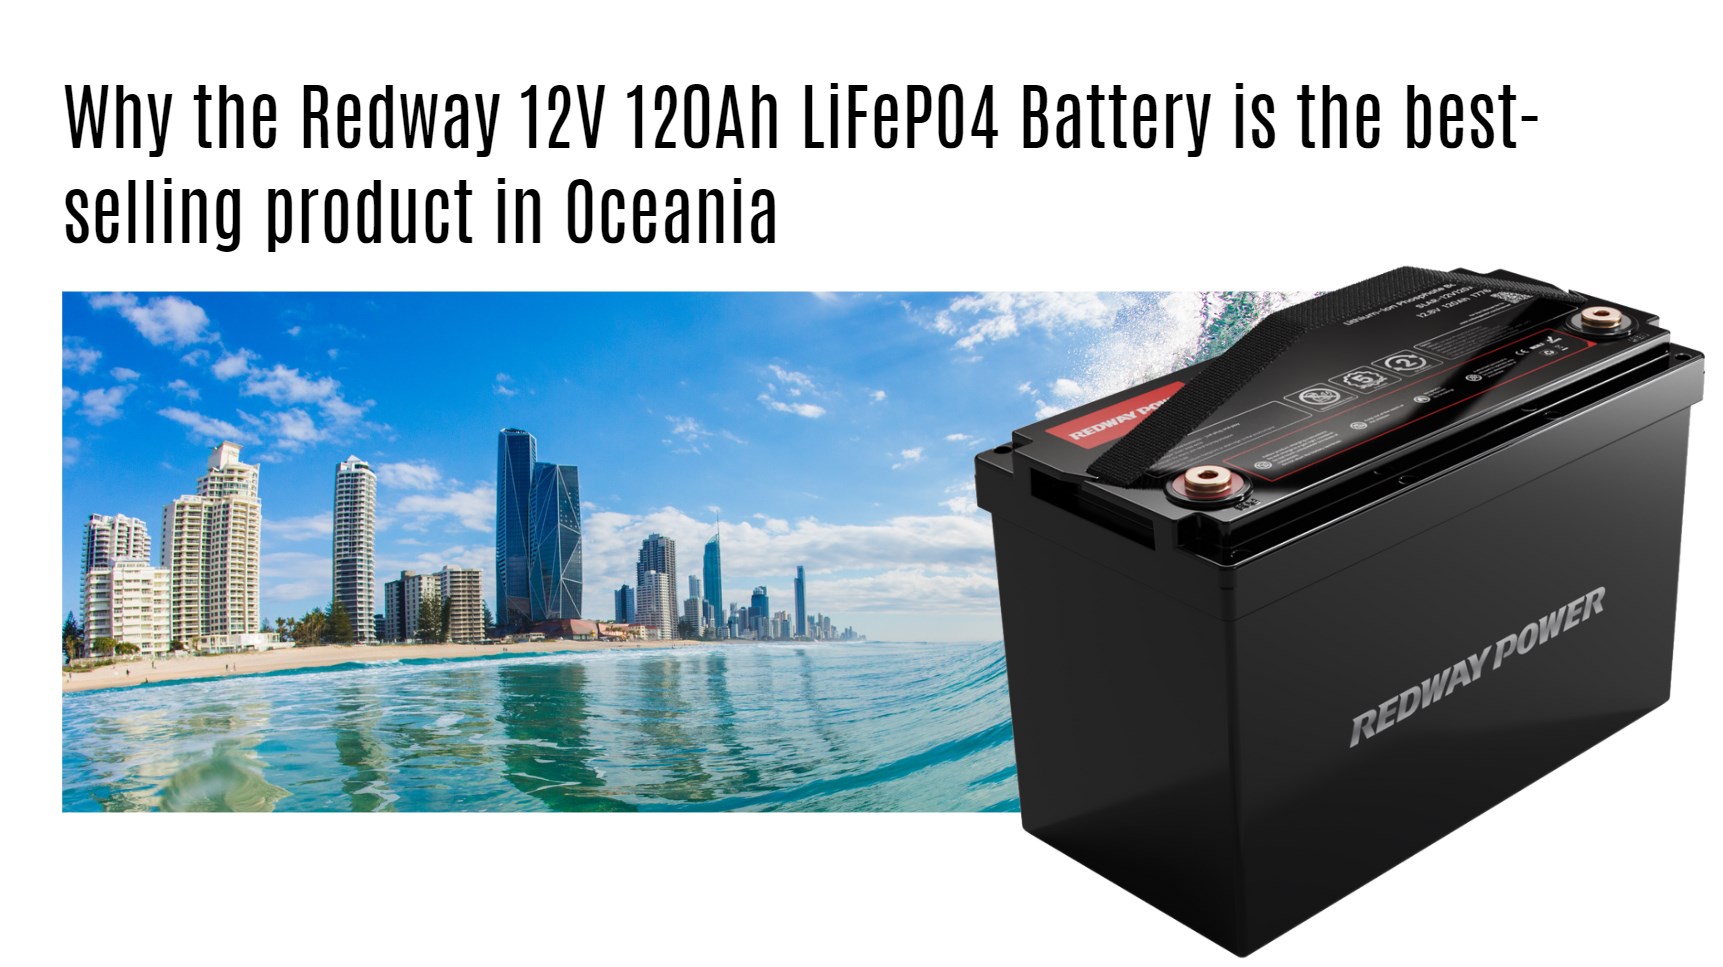 The Pros and Cons of the Redway 12V 120Ah LiFePO4 Battery